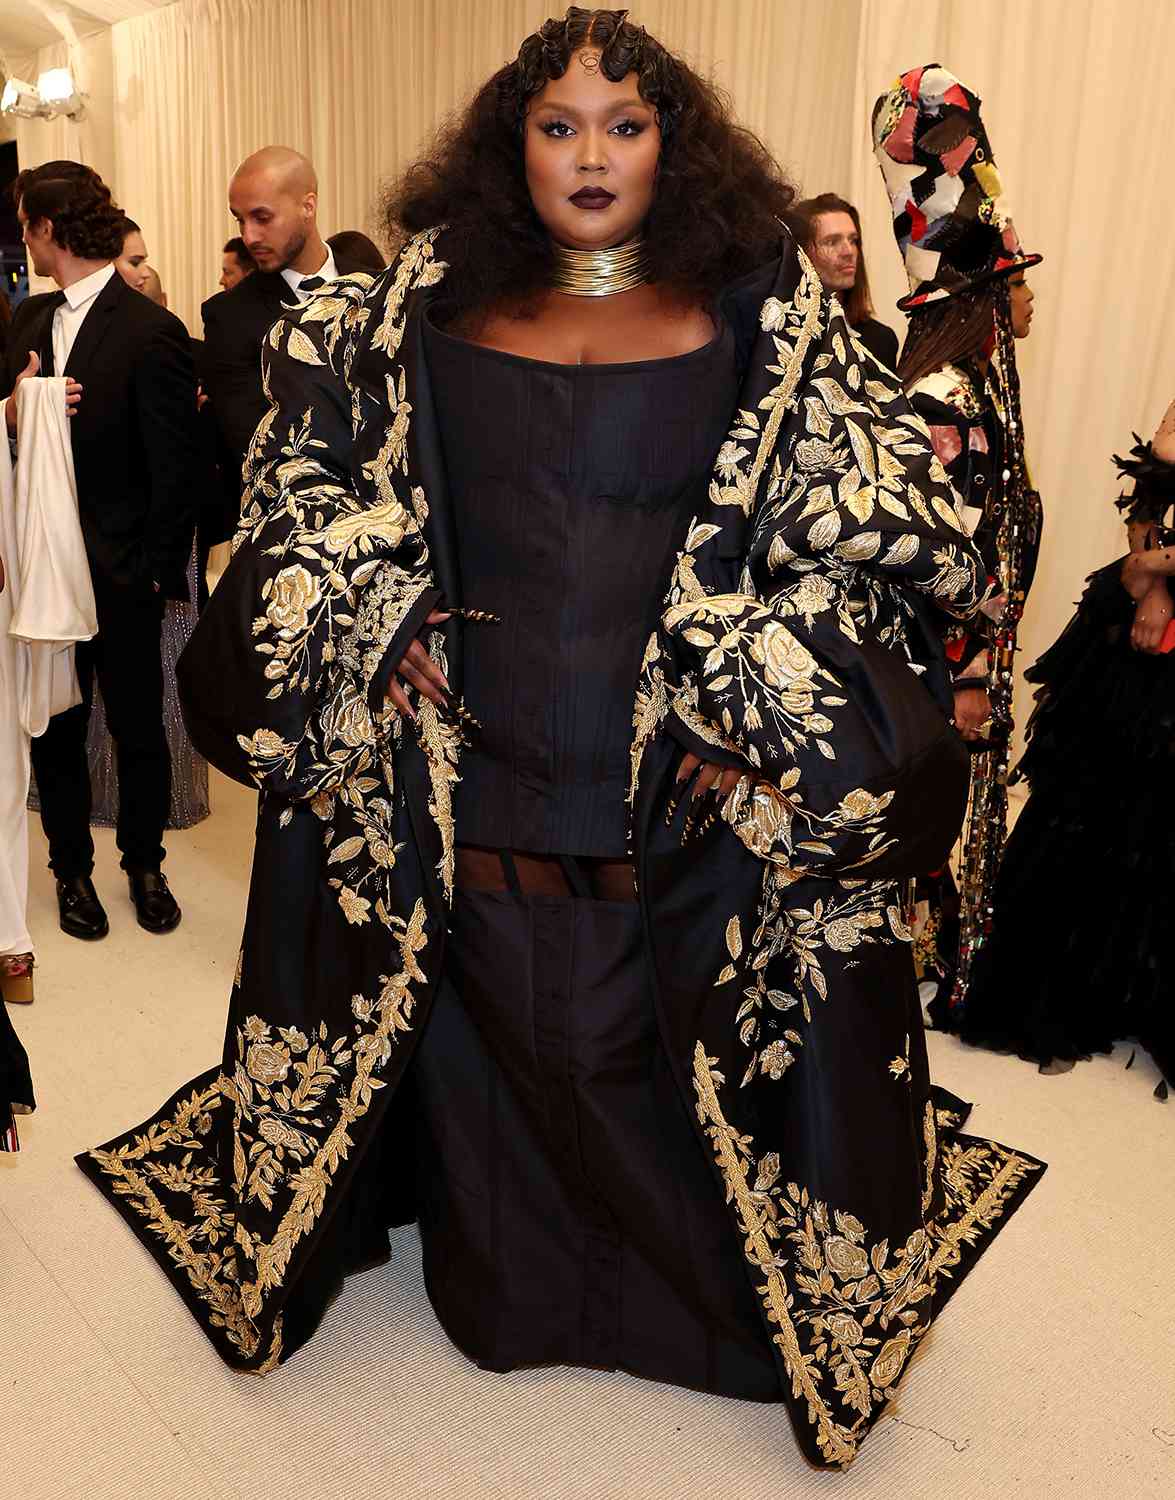 Lizzo Goes for Drama in Embroidered Coat and Brings Special Met Gala Accessory — Her Flute!